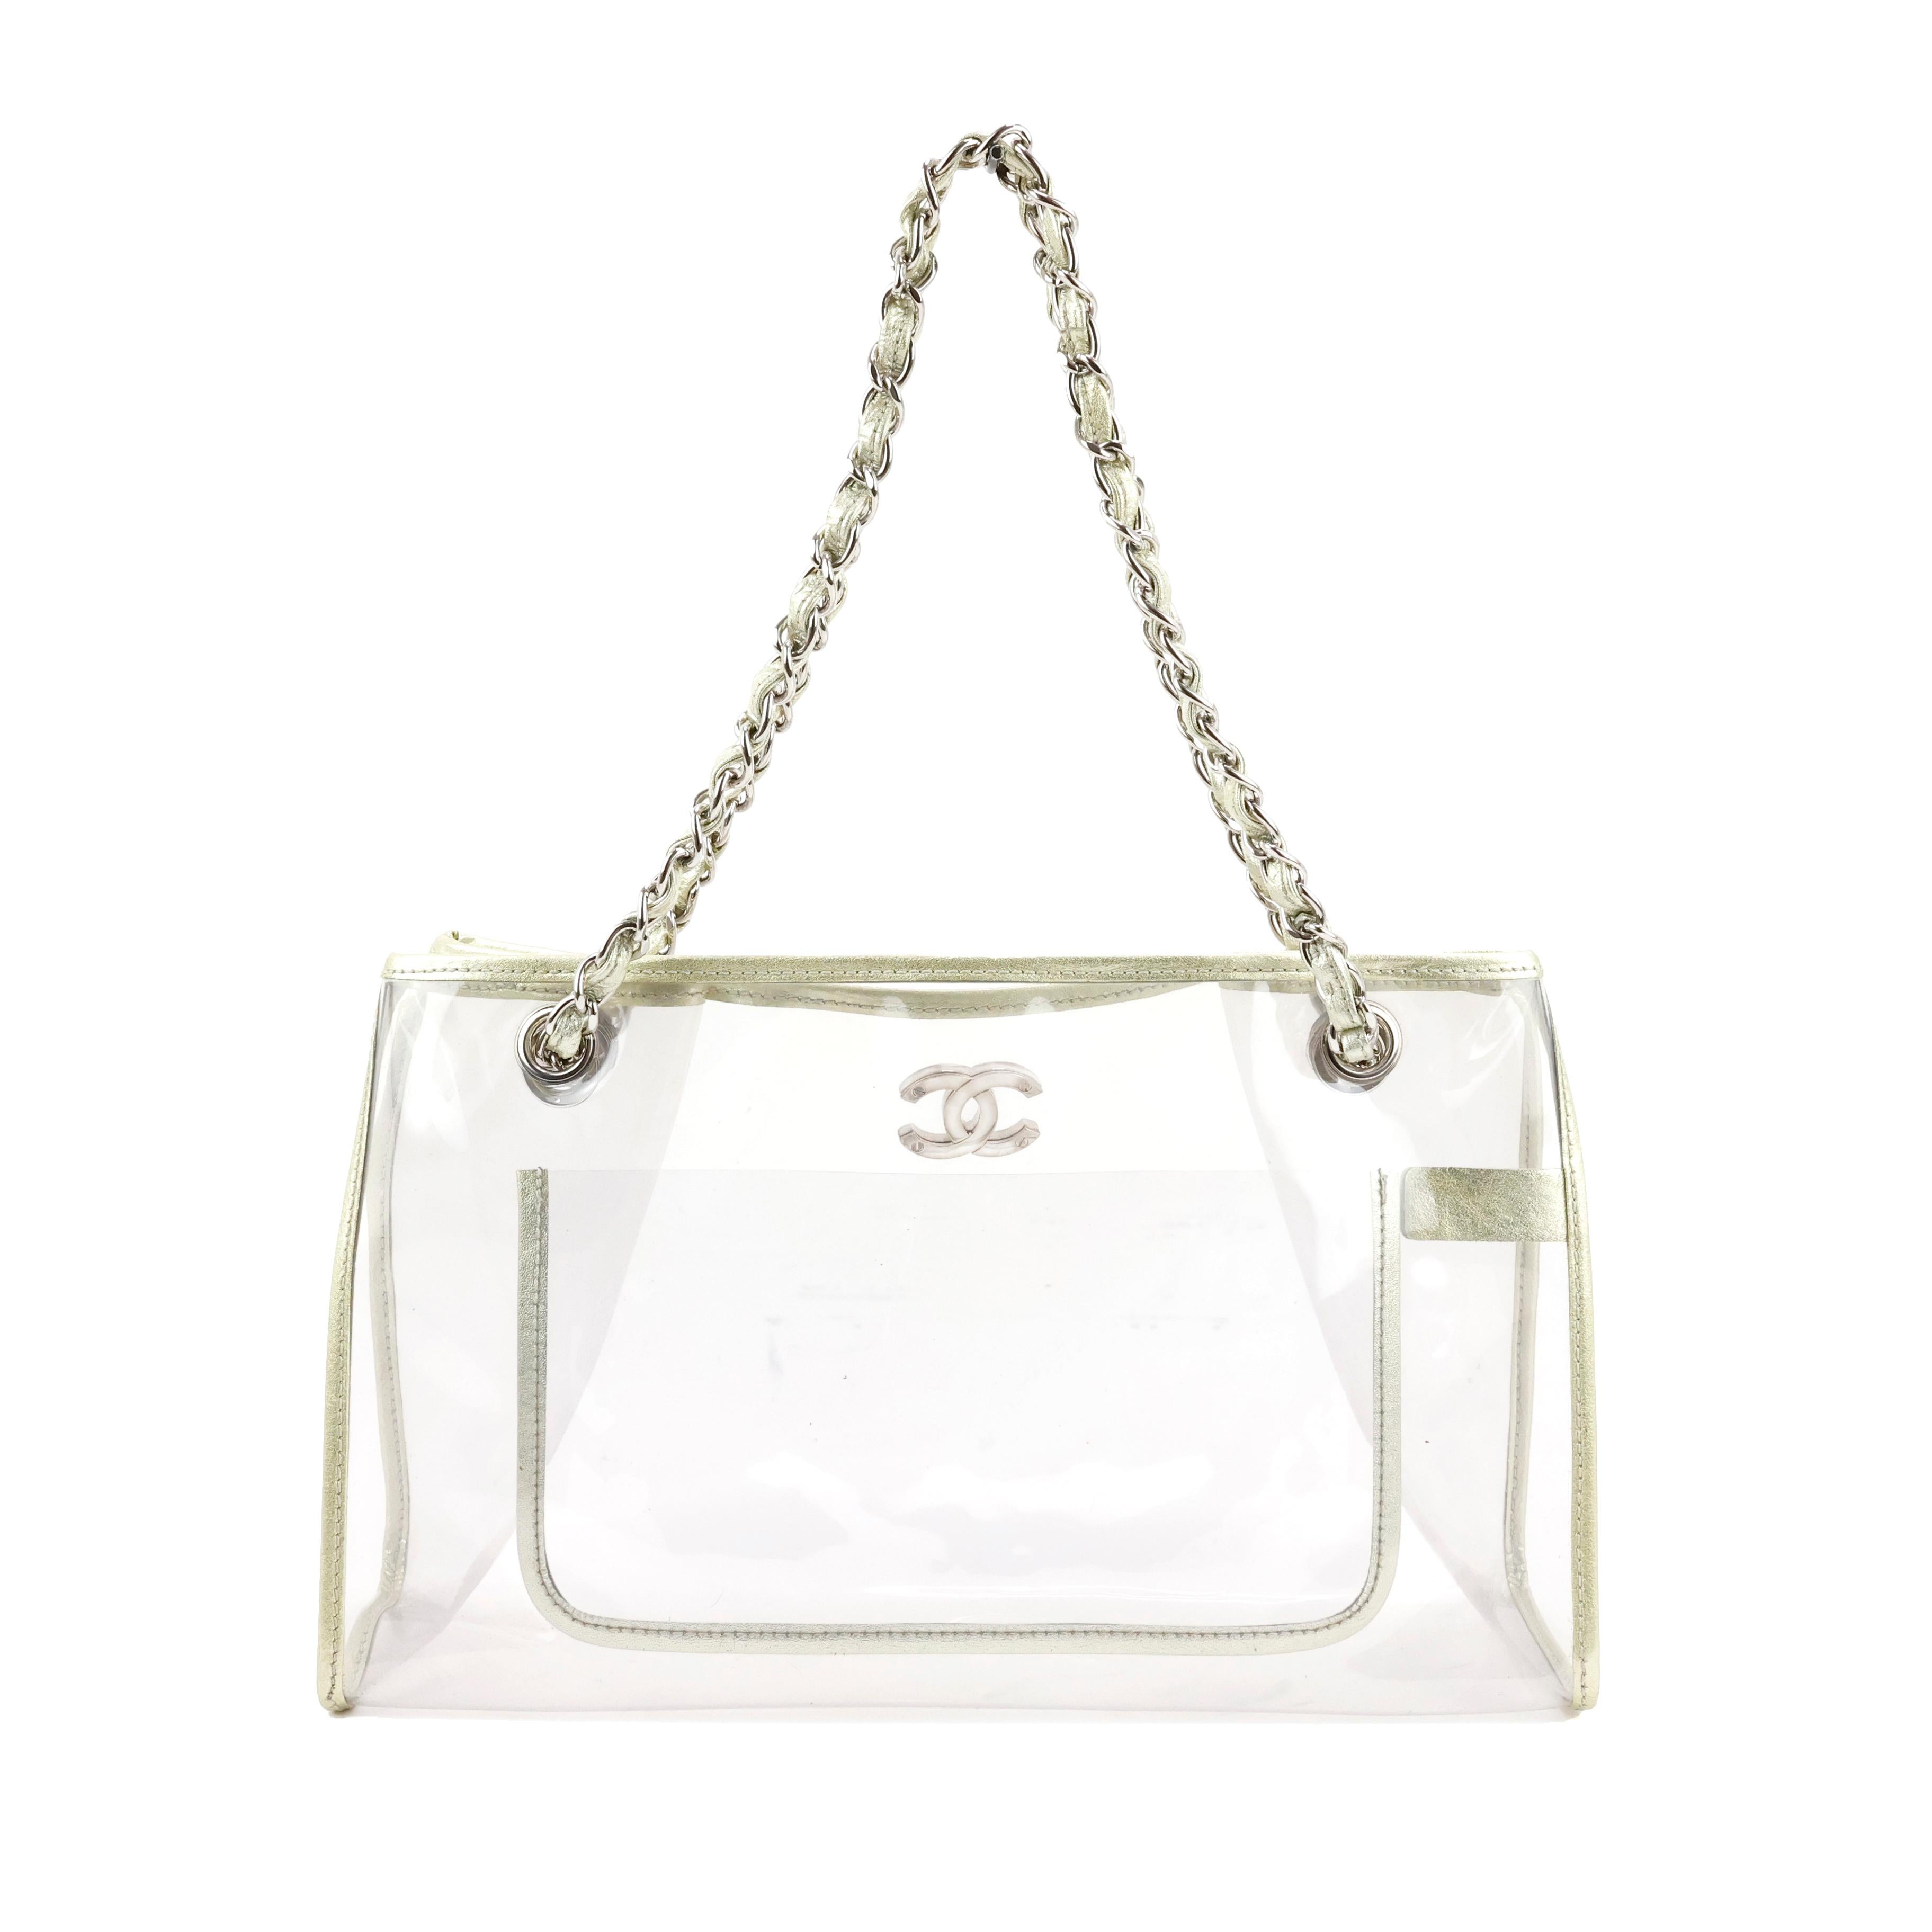 Chanel transparent shopper / shoulder bag in PVC and leather, with silver hardware.


Condition:
Really good.


Packing/accessories:
Box, dustbag.


Measurements:
34cm x 22cm x 10cm